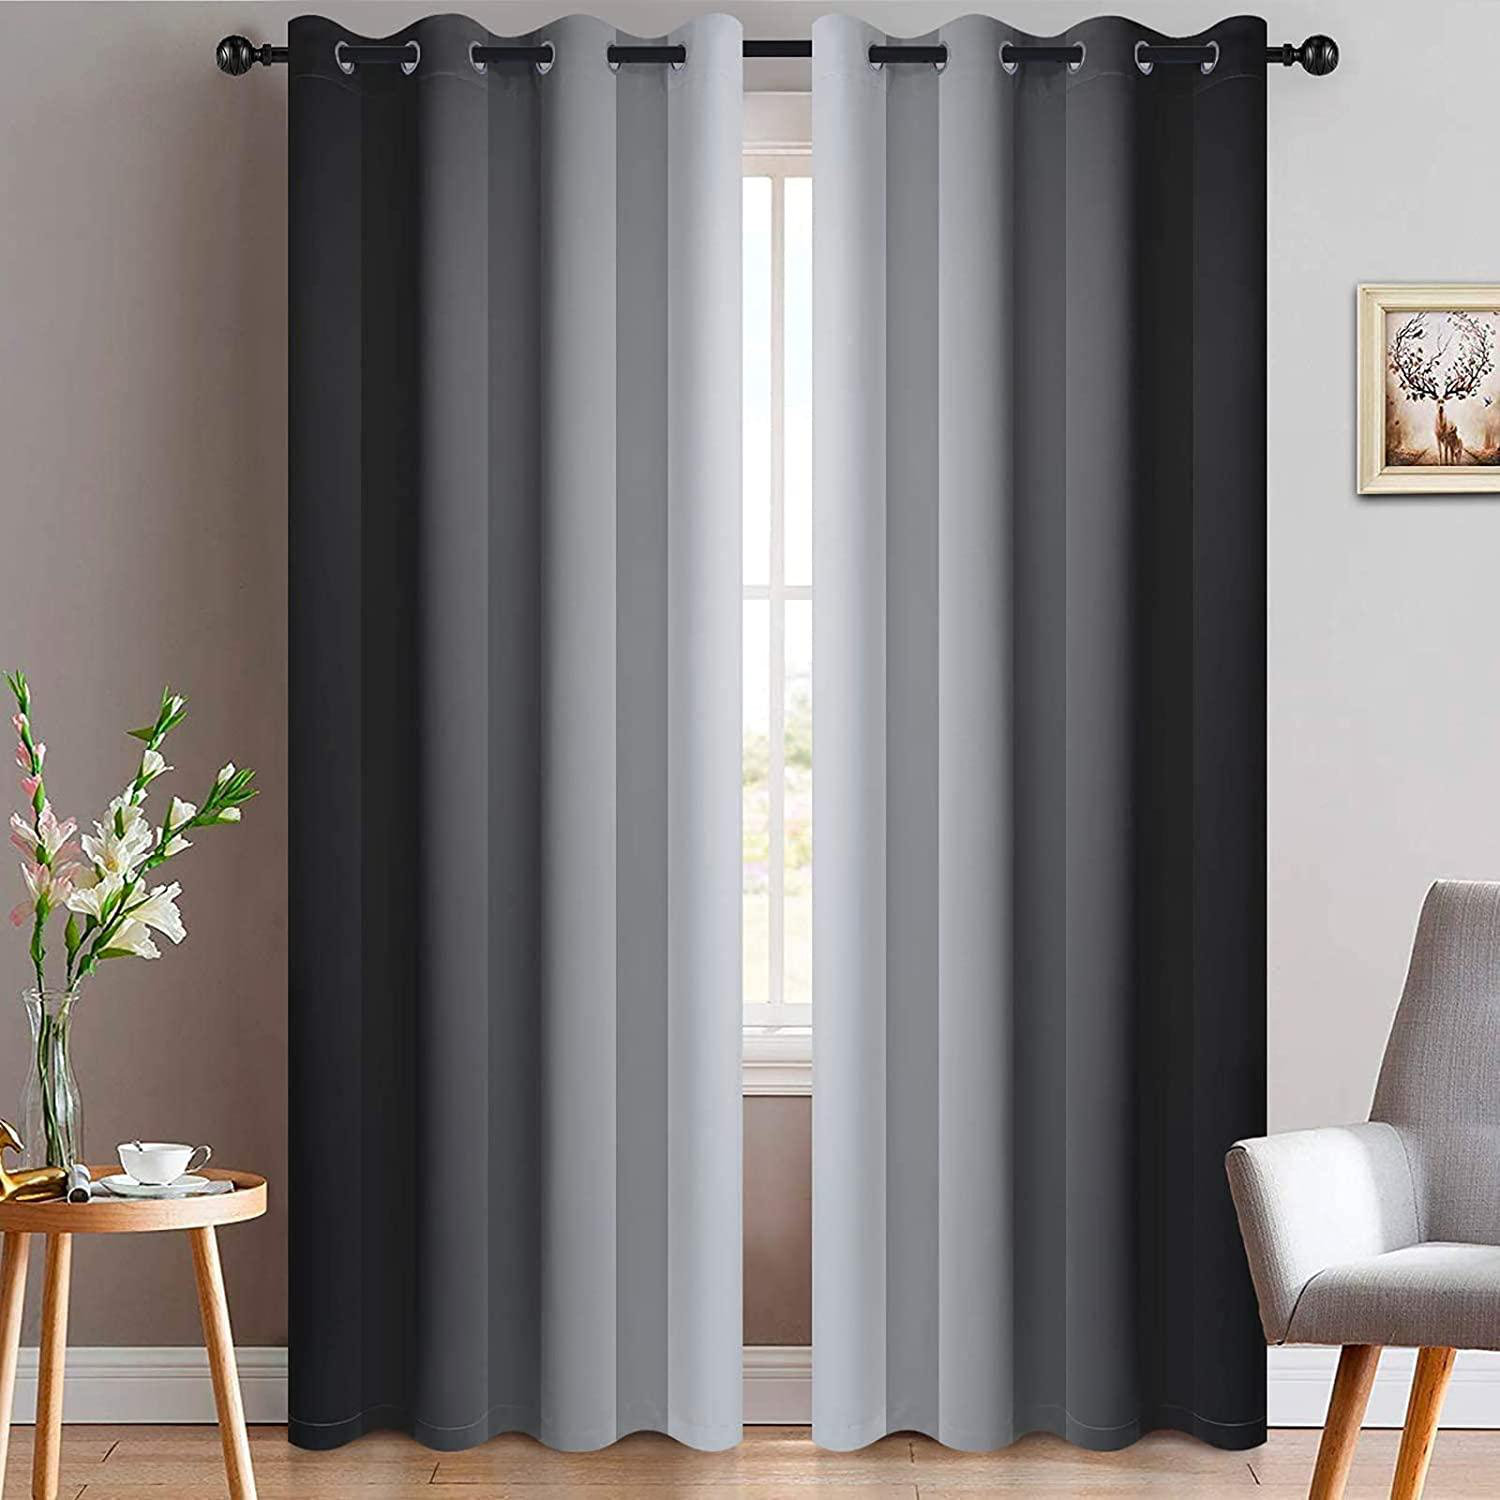 Thermal Insulated Grommet Blackout Curtains Window Drapes for Bedroom 2 Panels 